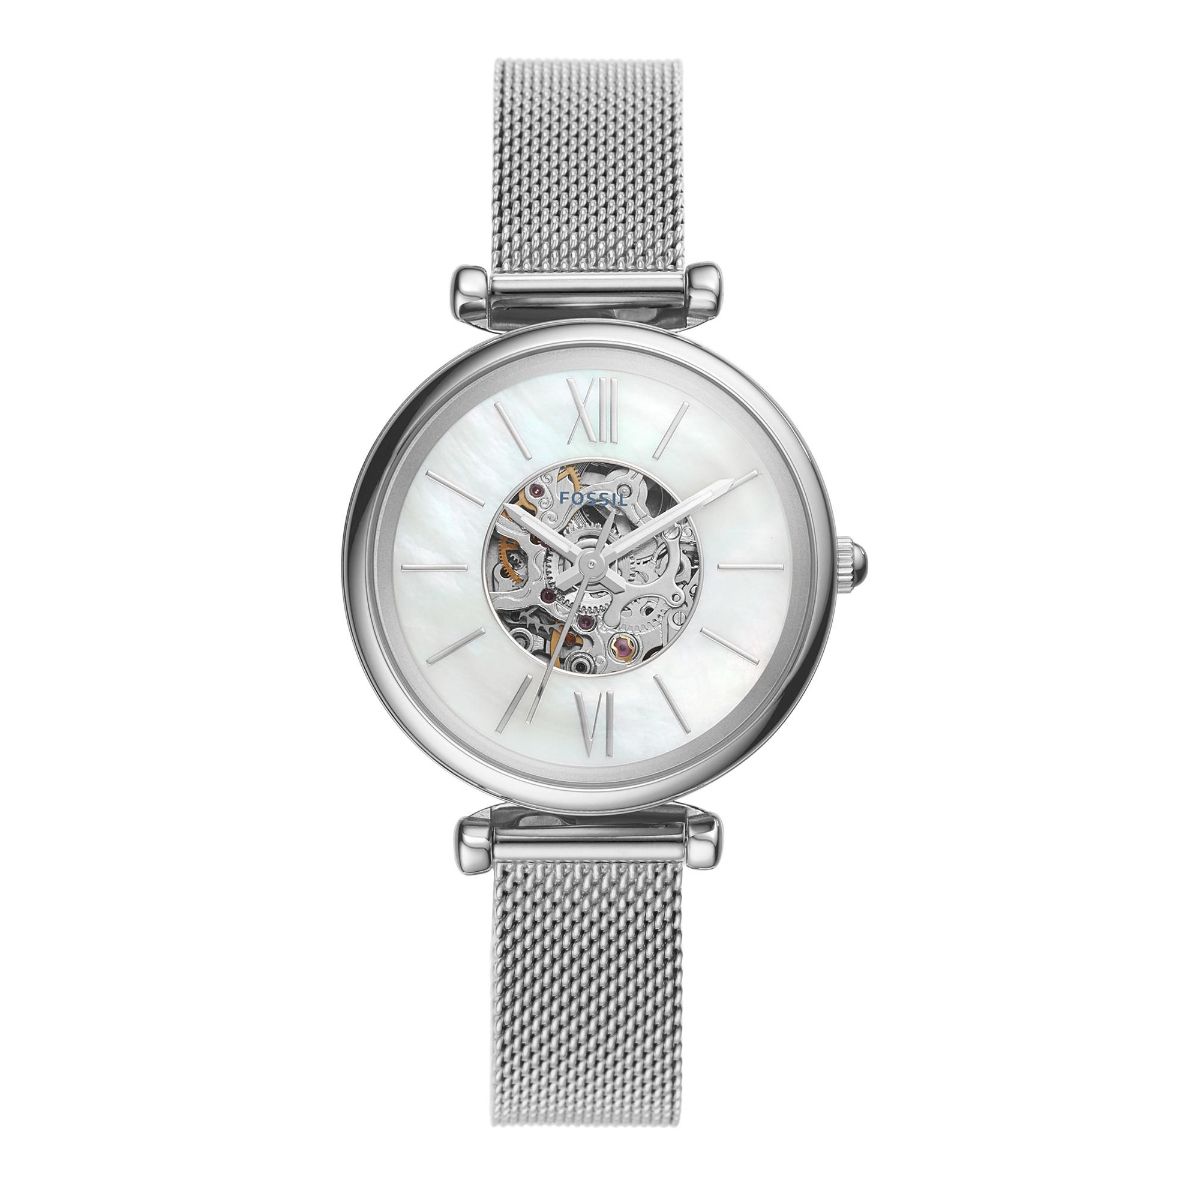 Fossil Carlie Mini Me Silver Watch Me3189 For Women: Buy Fossil